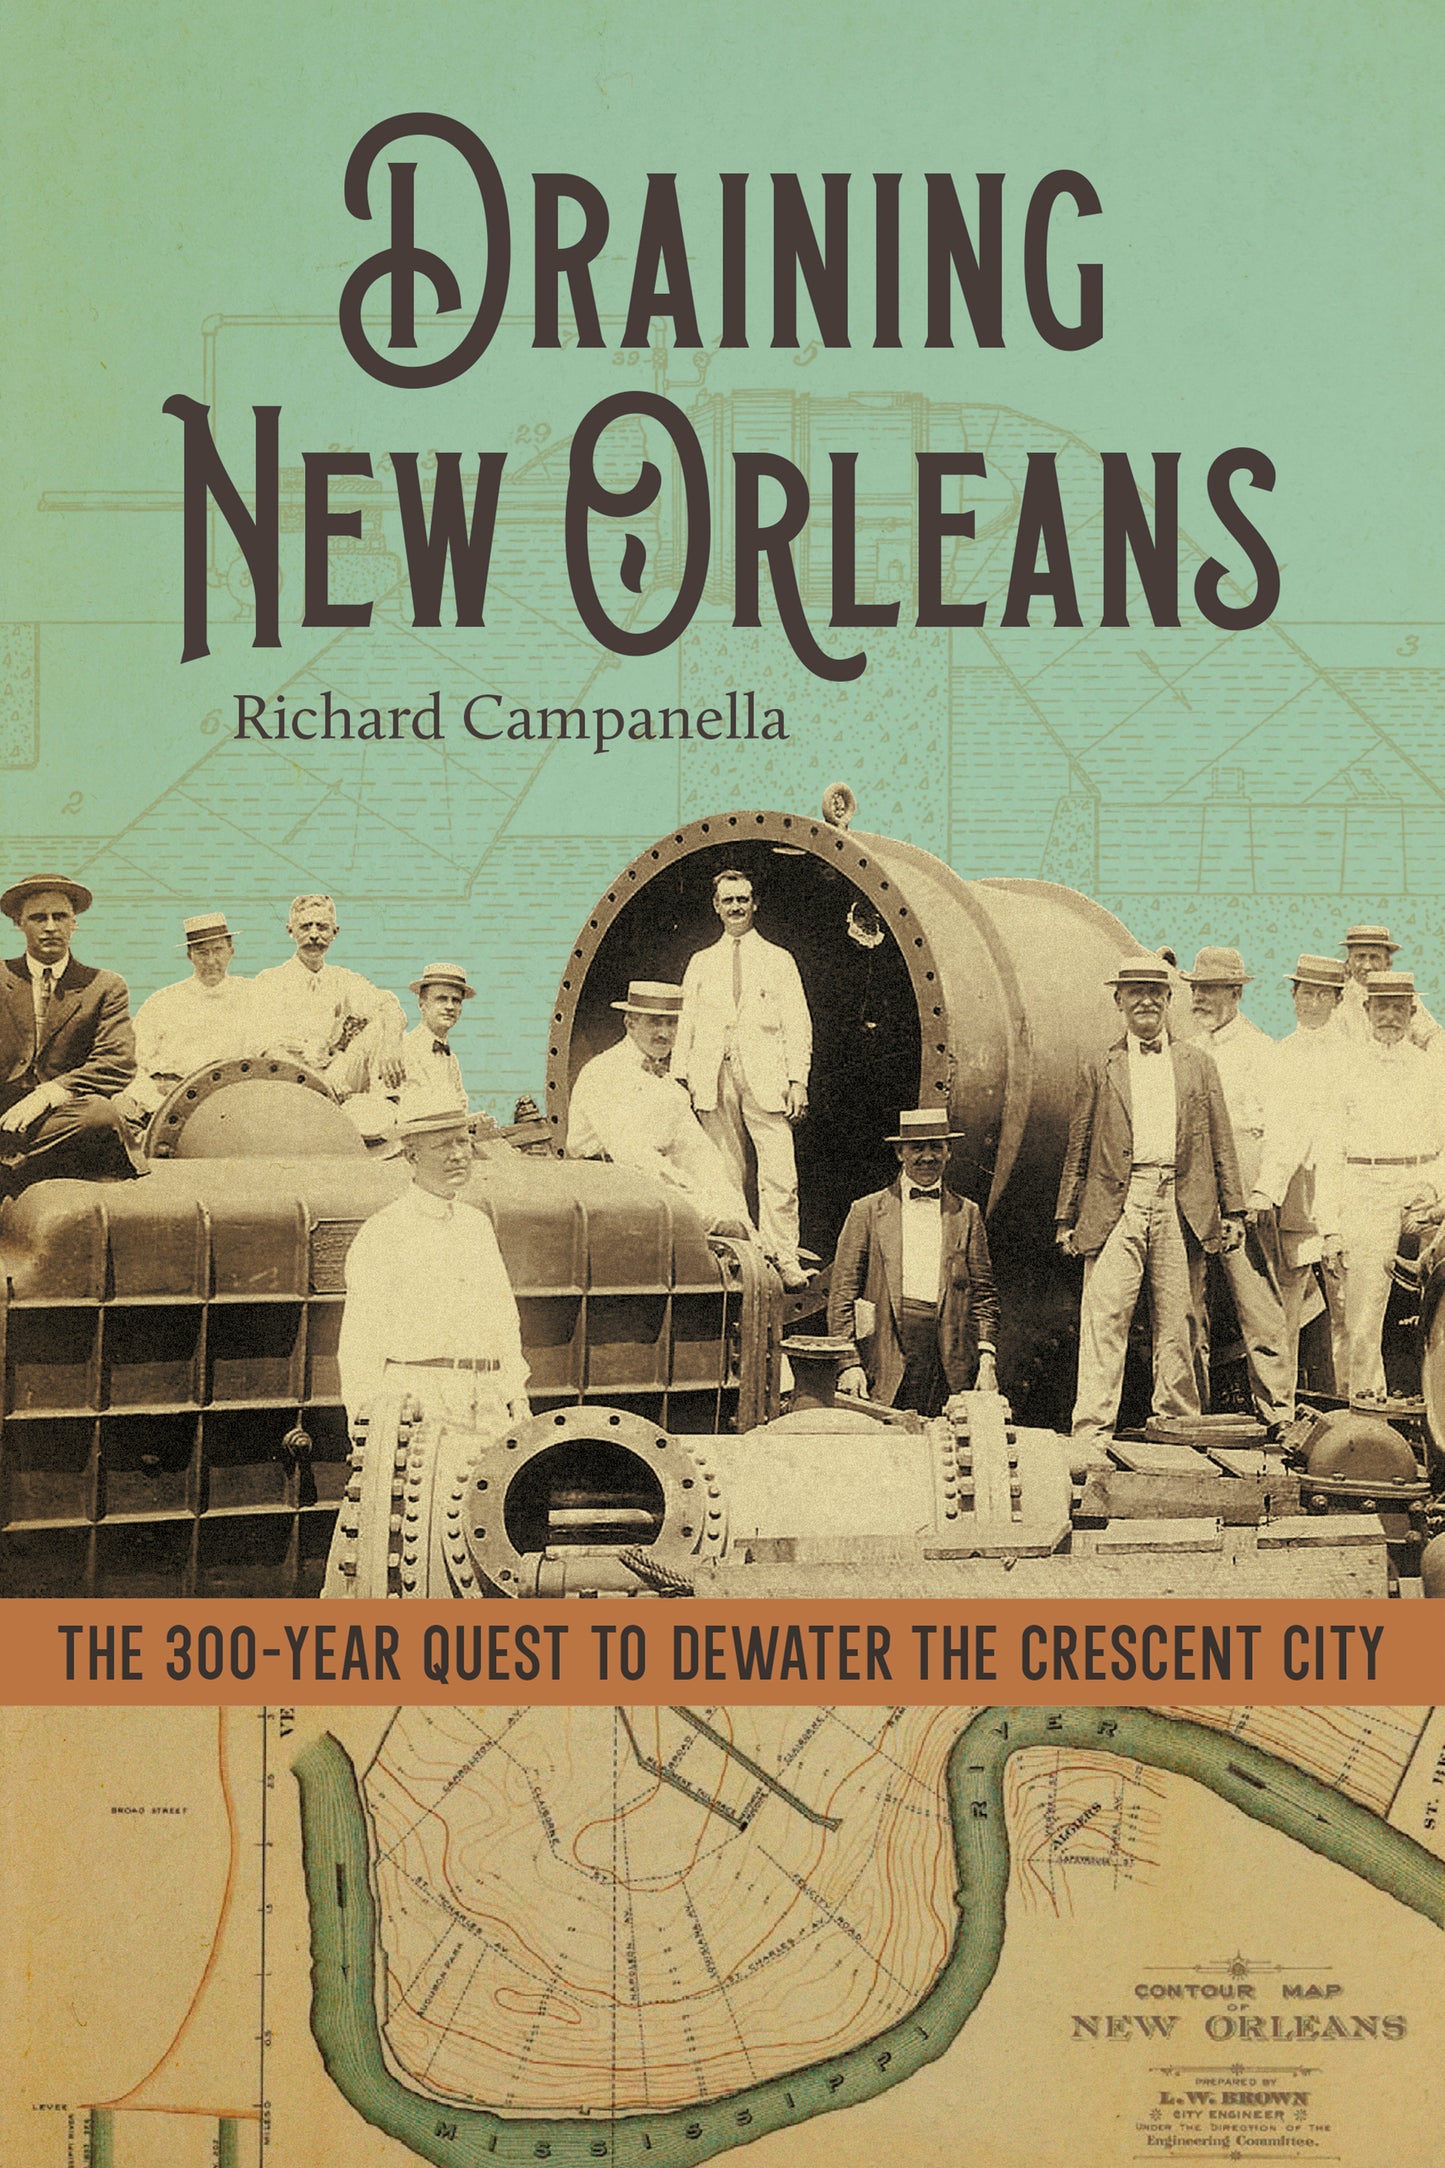 Draining New Orleans The 300-Year Quest to Dewater the Crescent City